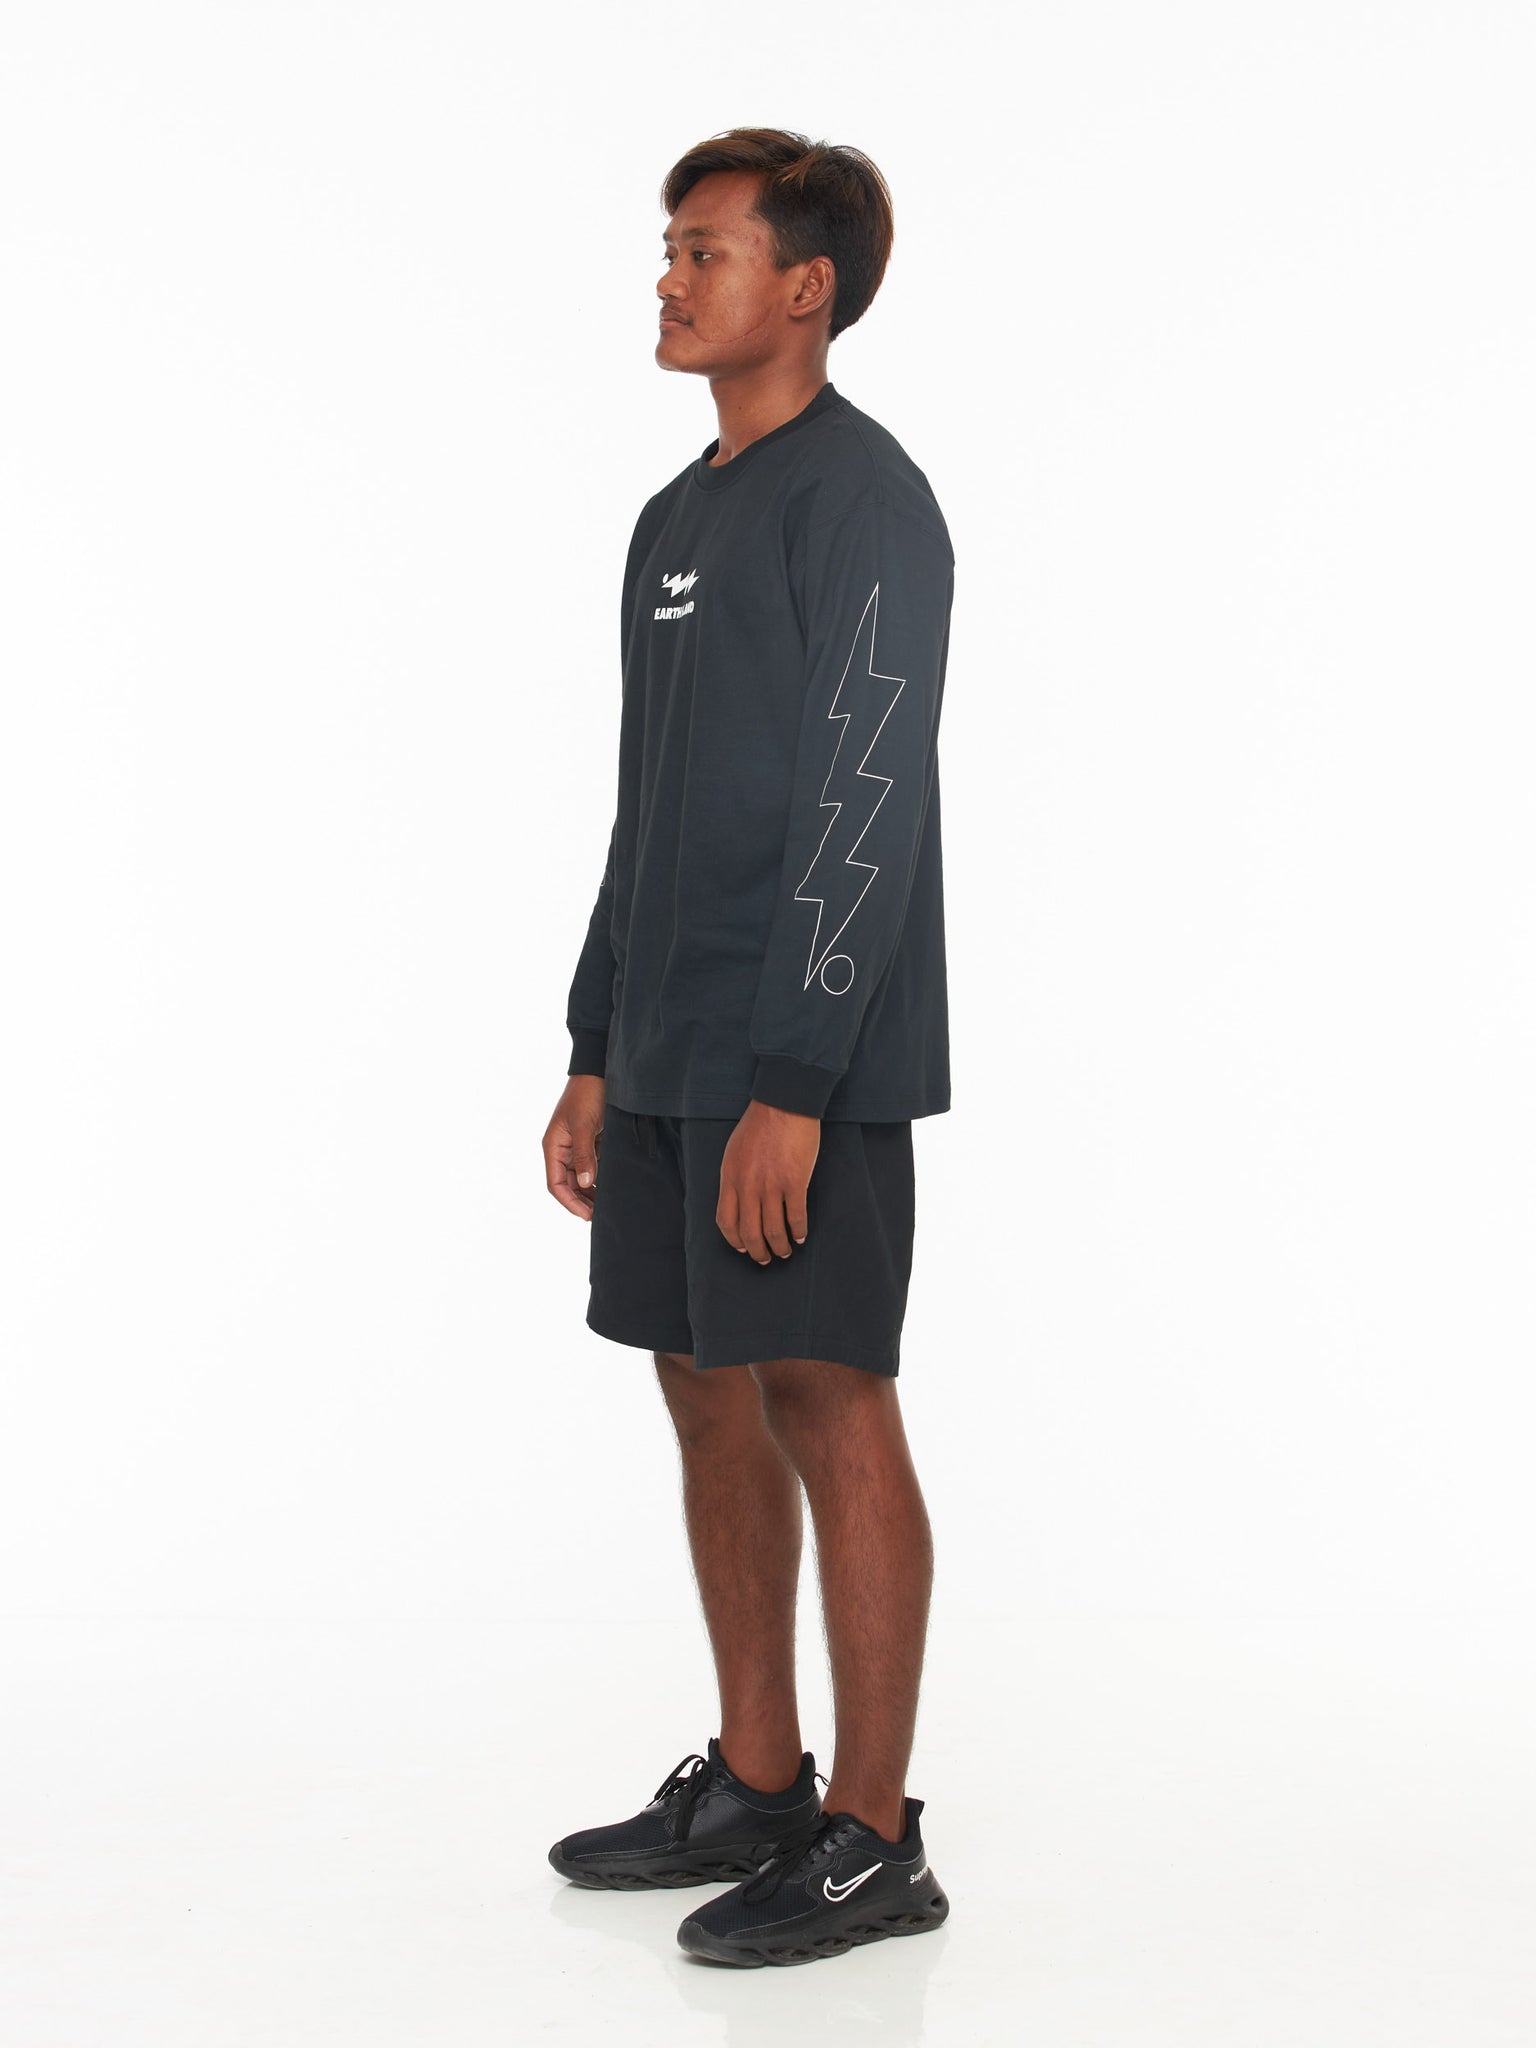 Earth Island - Surf Culture and Lifestyle - Product - Black Long Sleeve